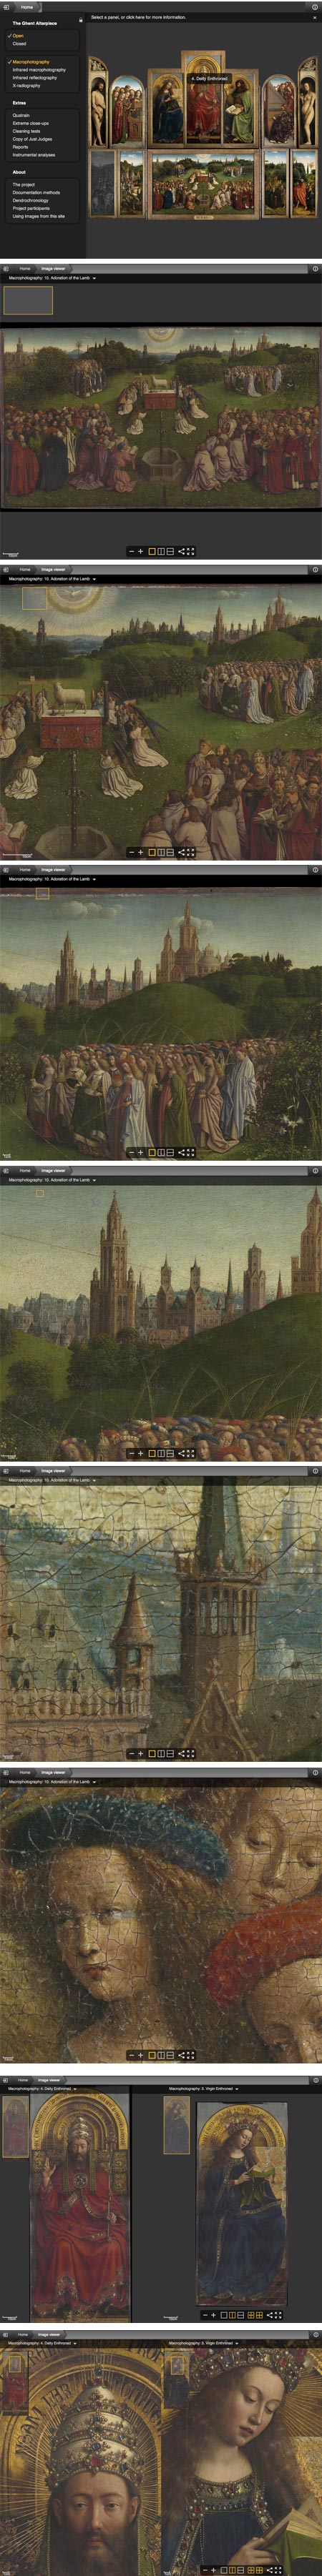 Closer to Van Eyck: Rediscovering the Ghent Altarpiece